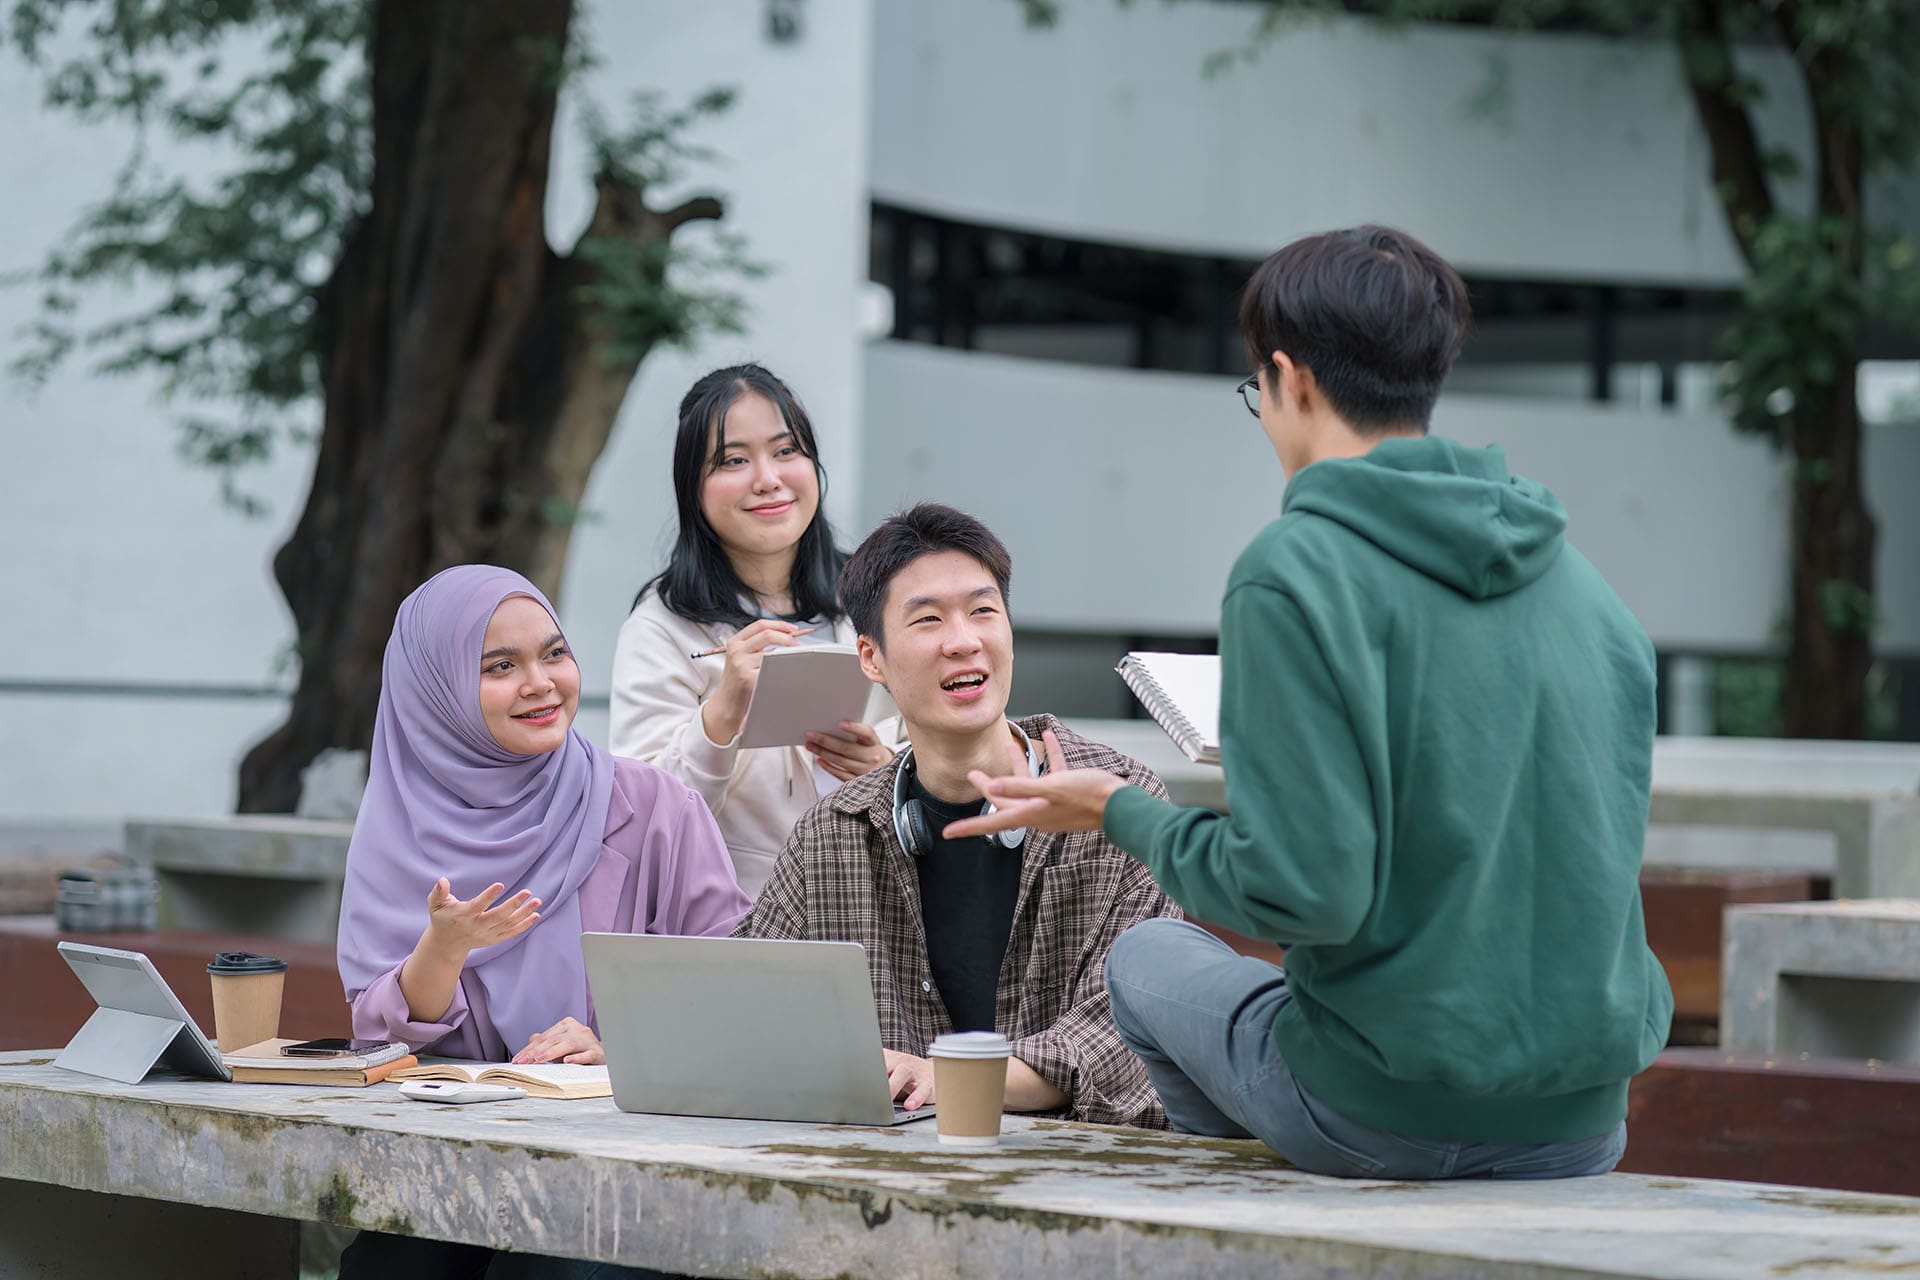 A group of students sitting on a bench and talking together.